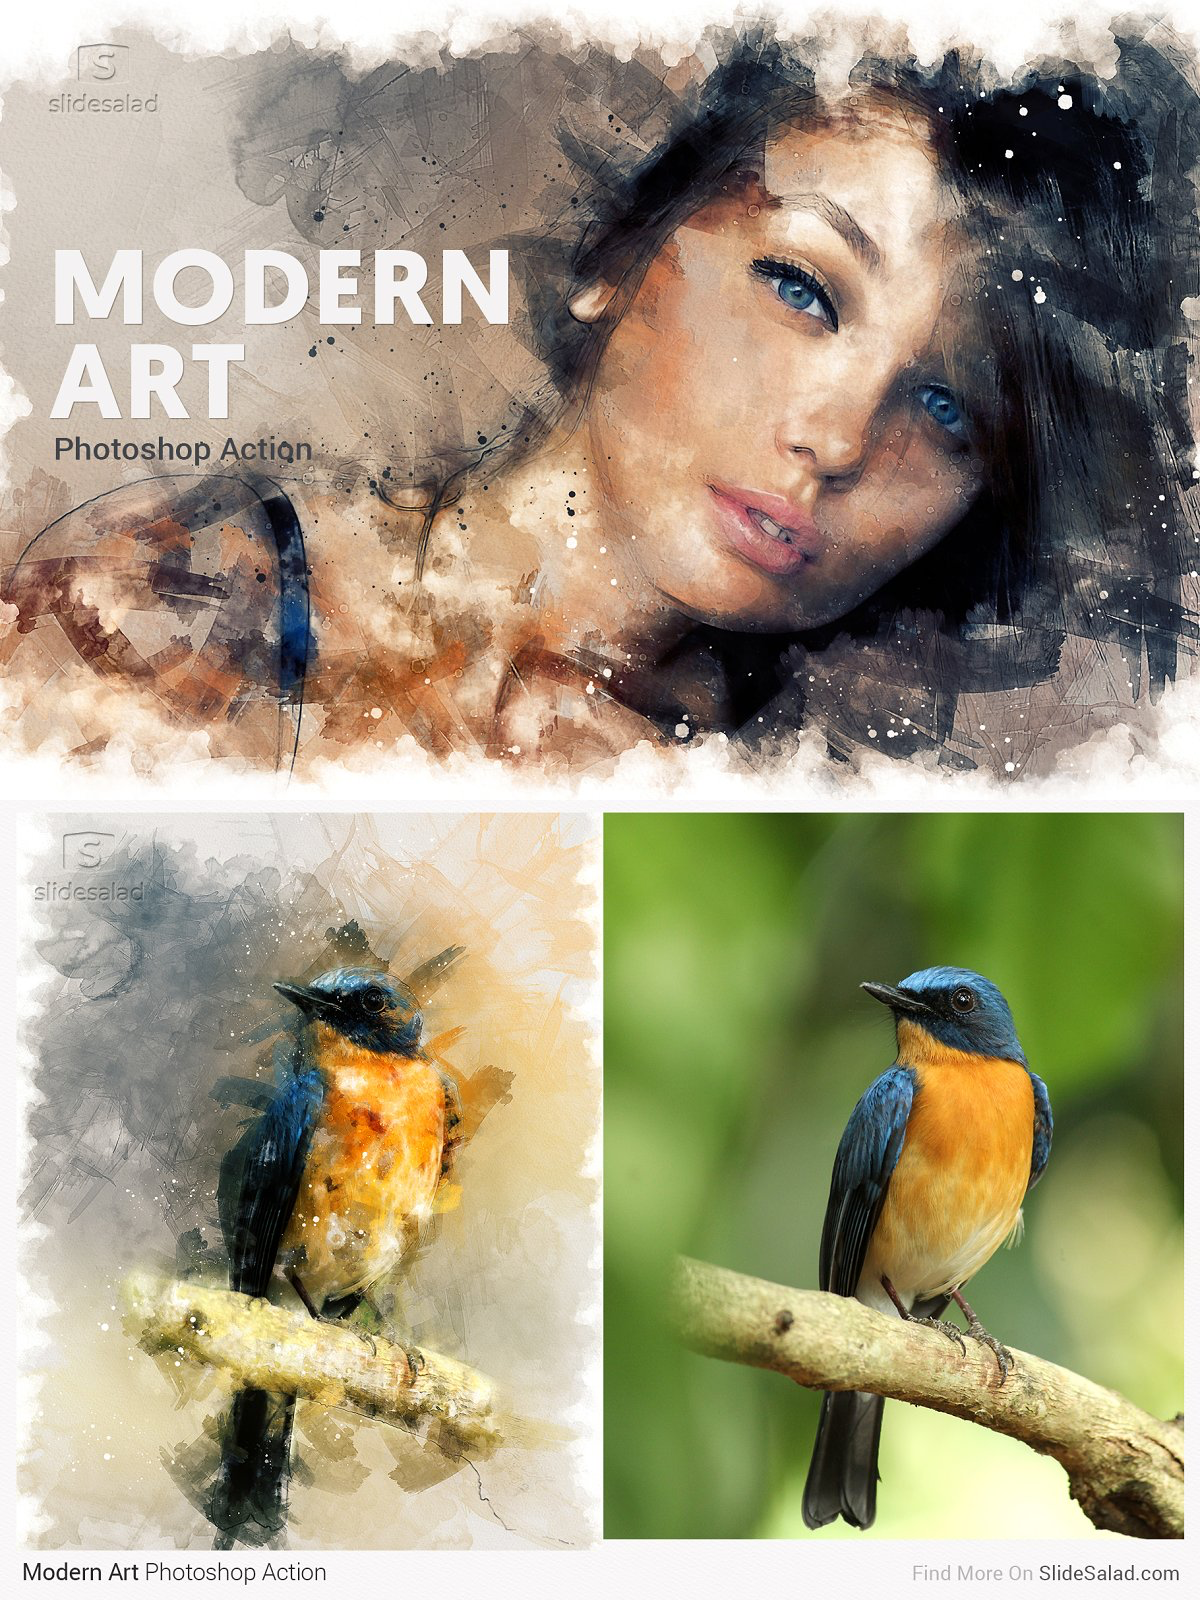 Modern art photoshop action pinterest image preview.